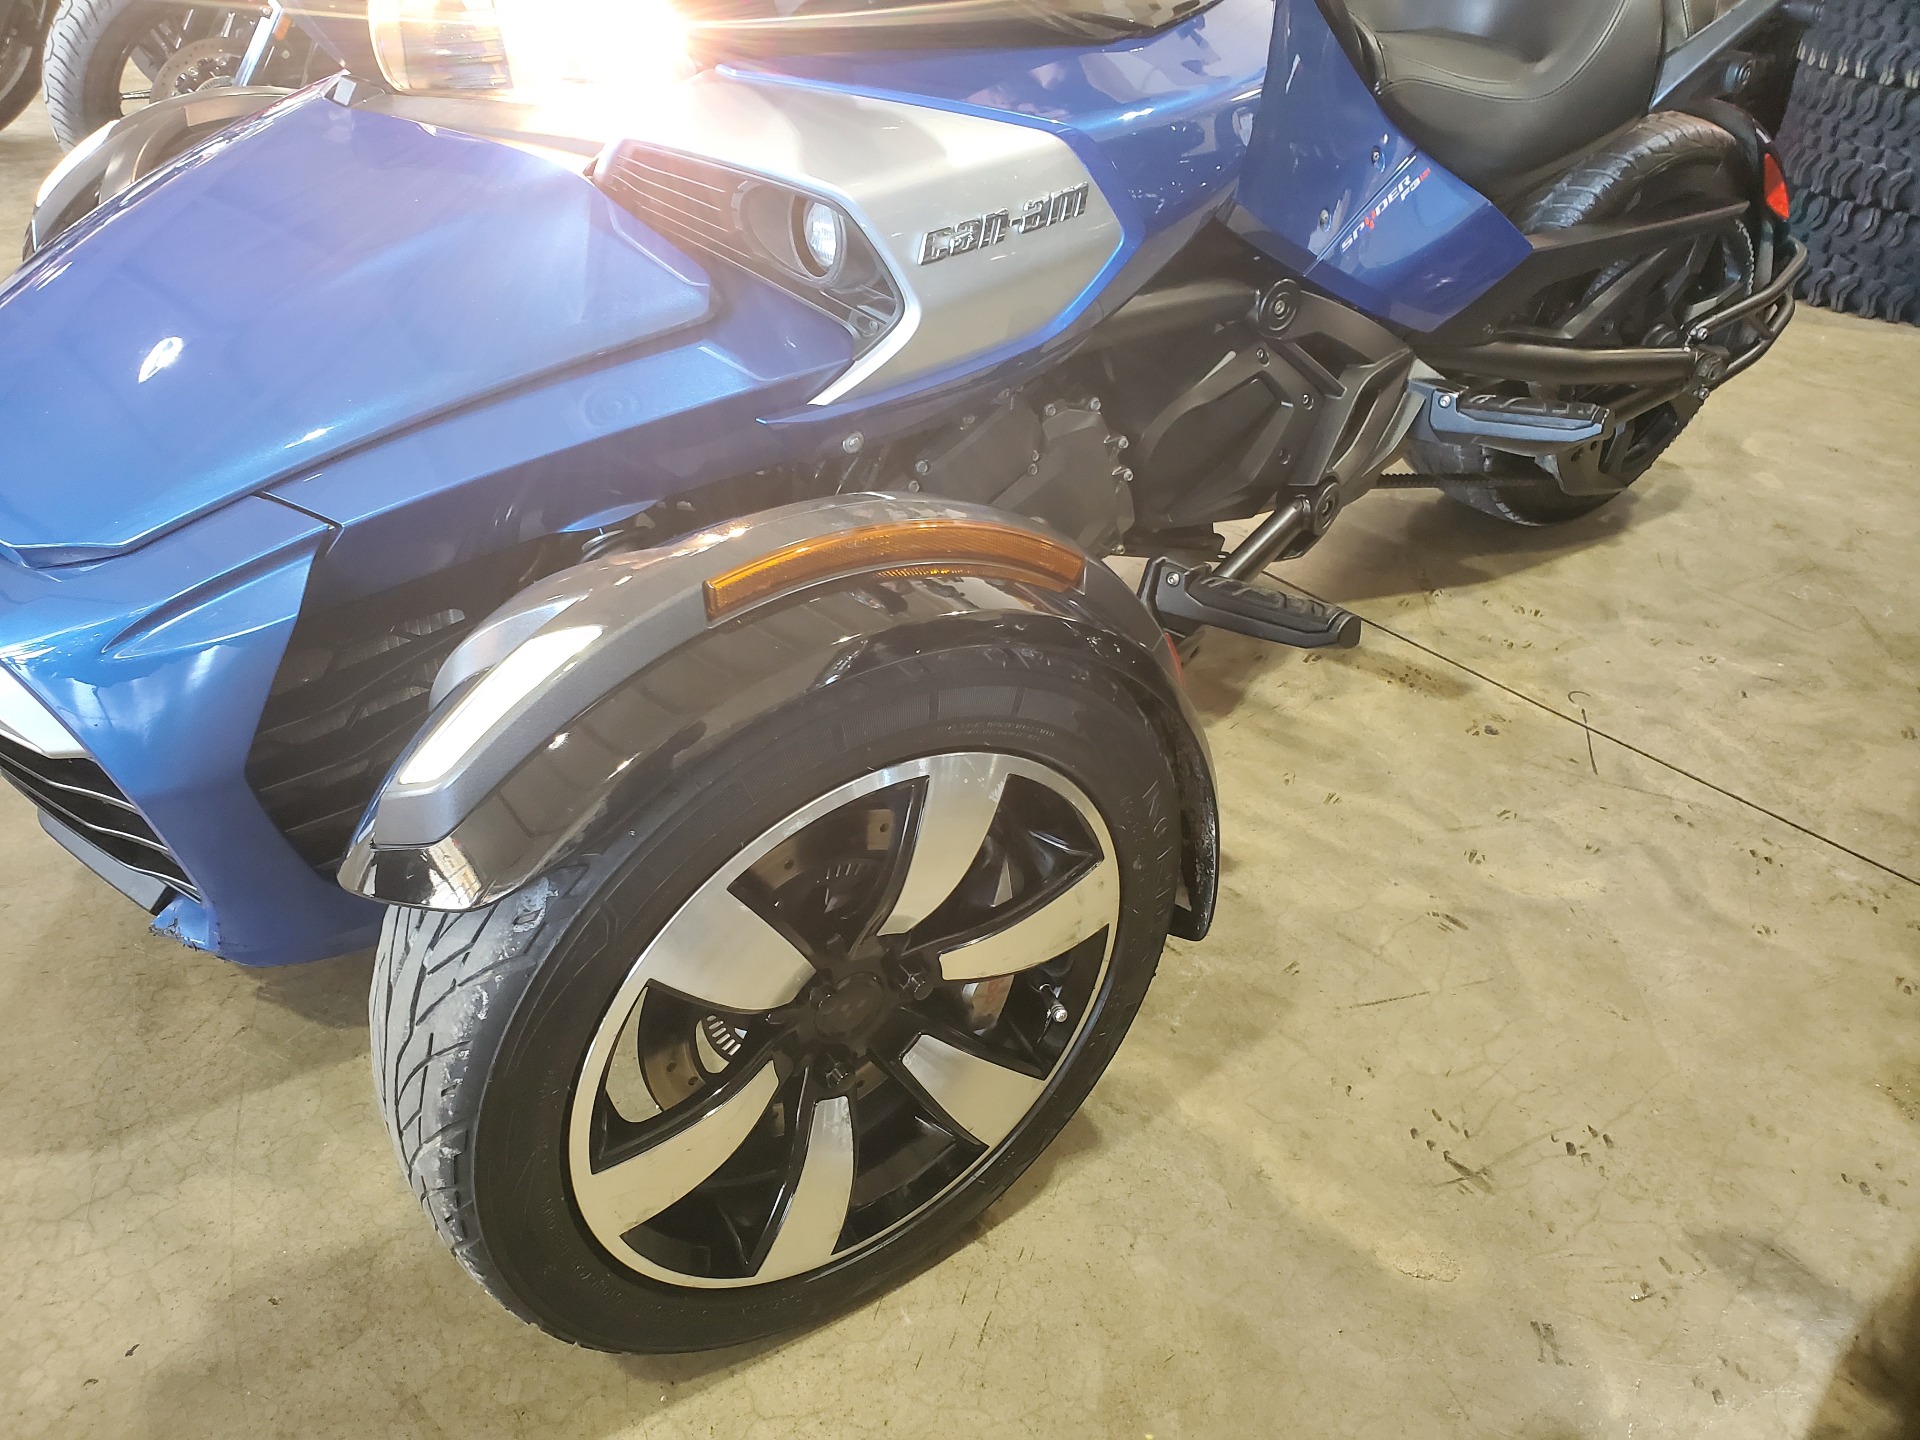 2017 Can-Am Spyder F3-S SE6 in Winchester, Tennessee - Photo 6